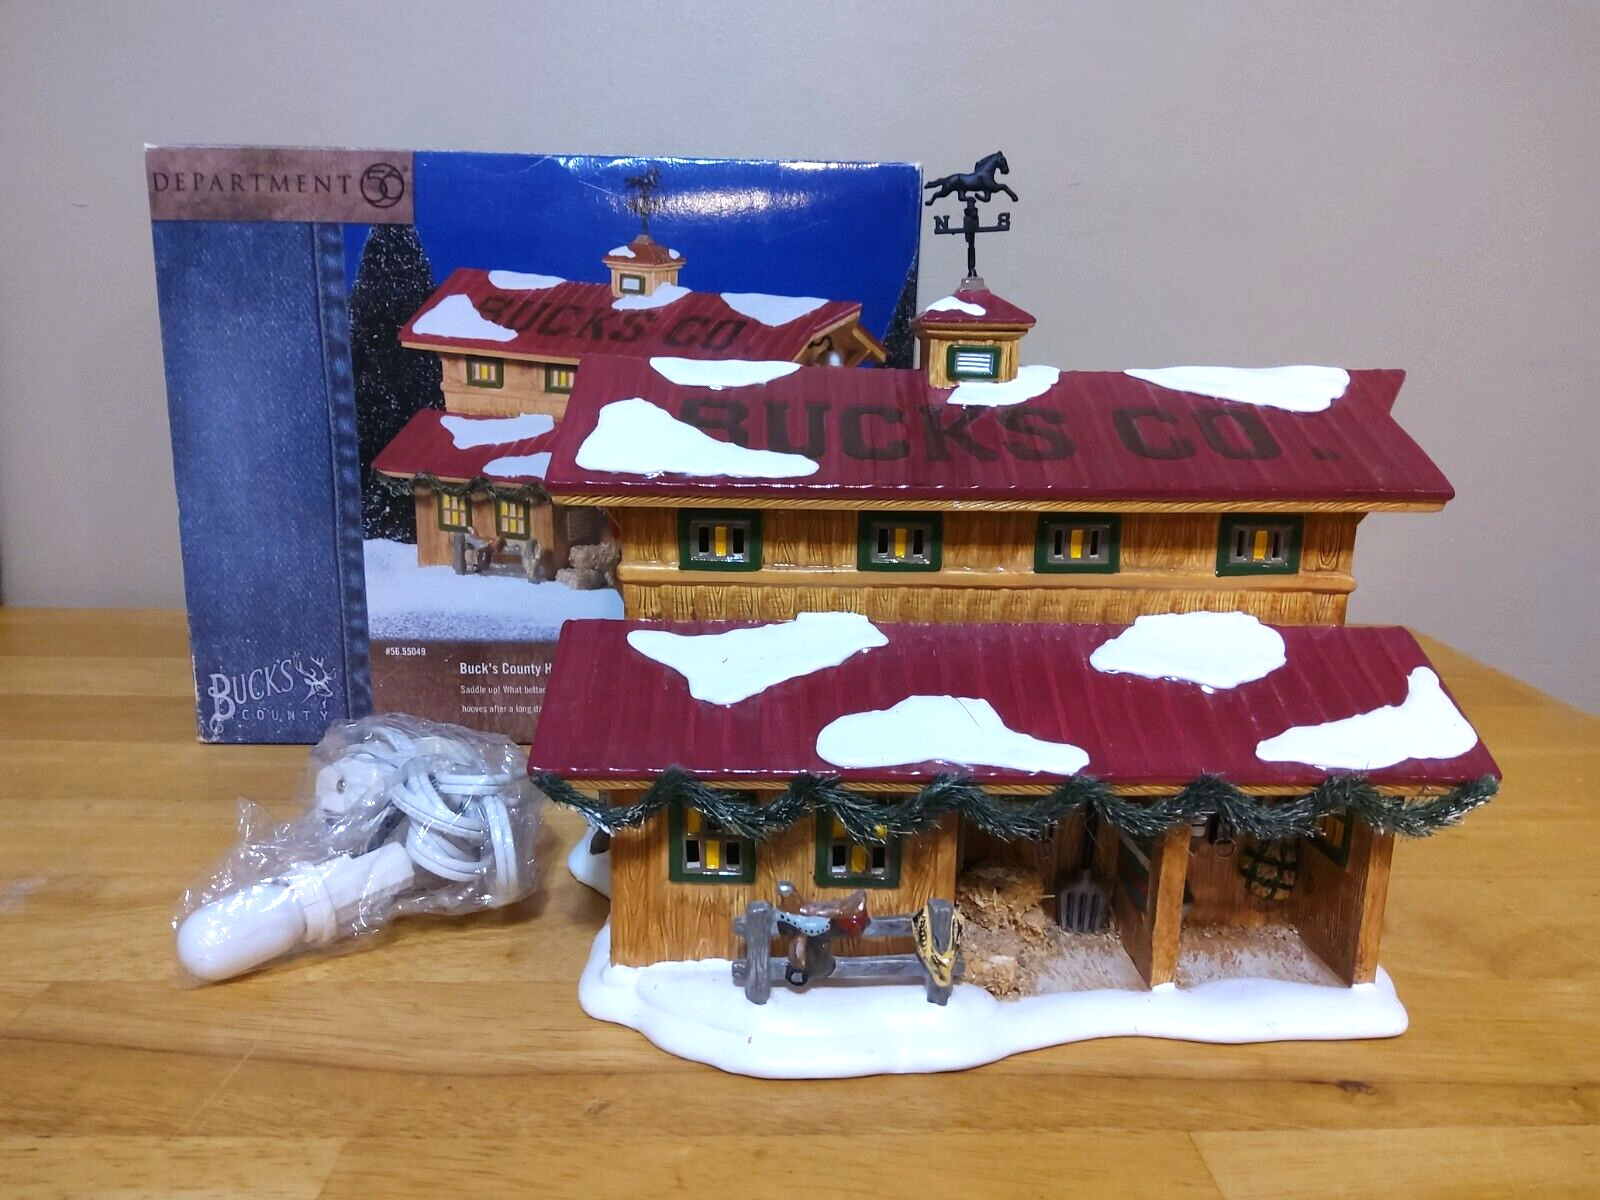 Department 56 Buck\'s County Horse Barn Snow Village Lighted Building 2000